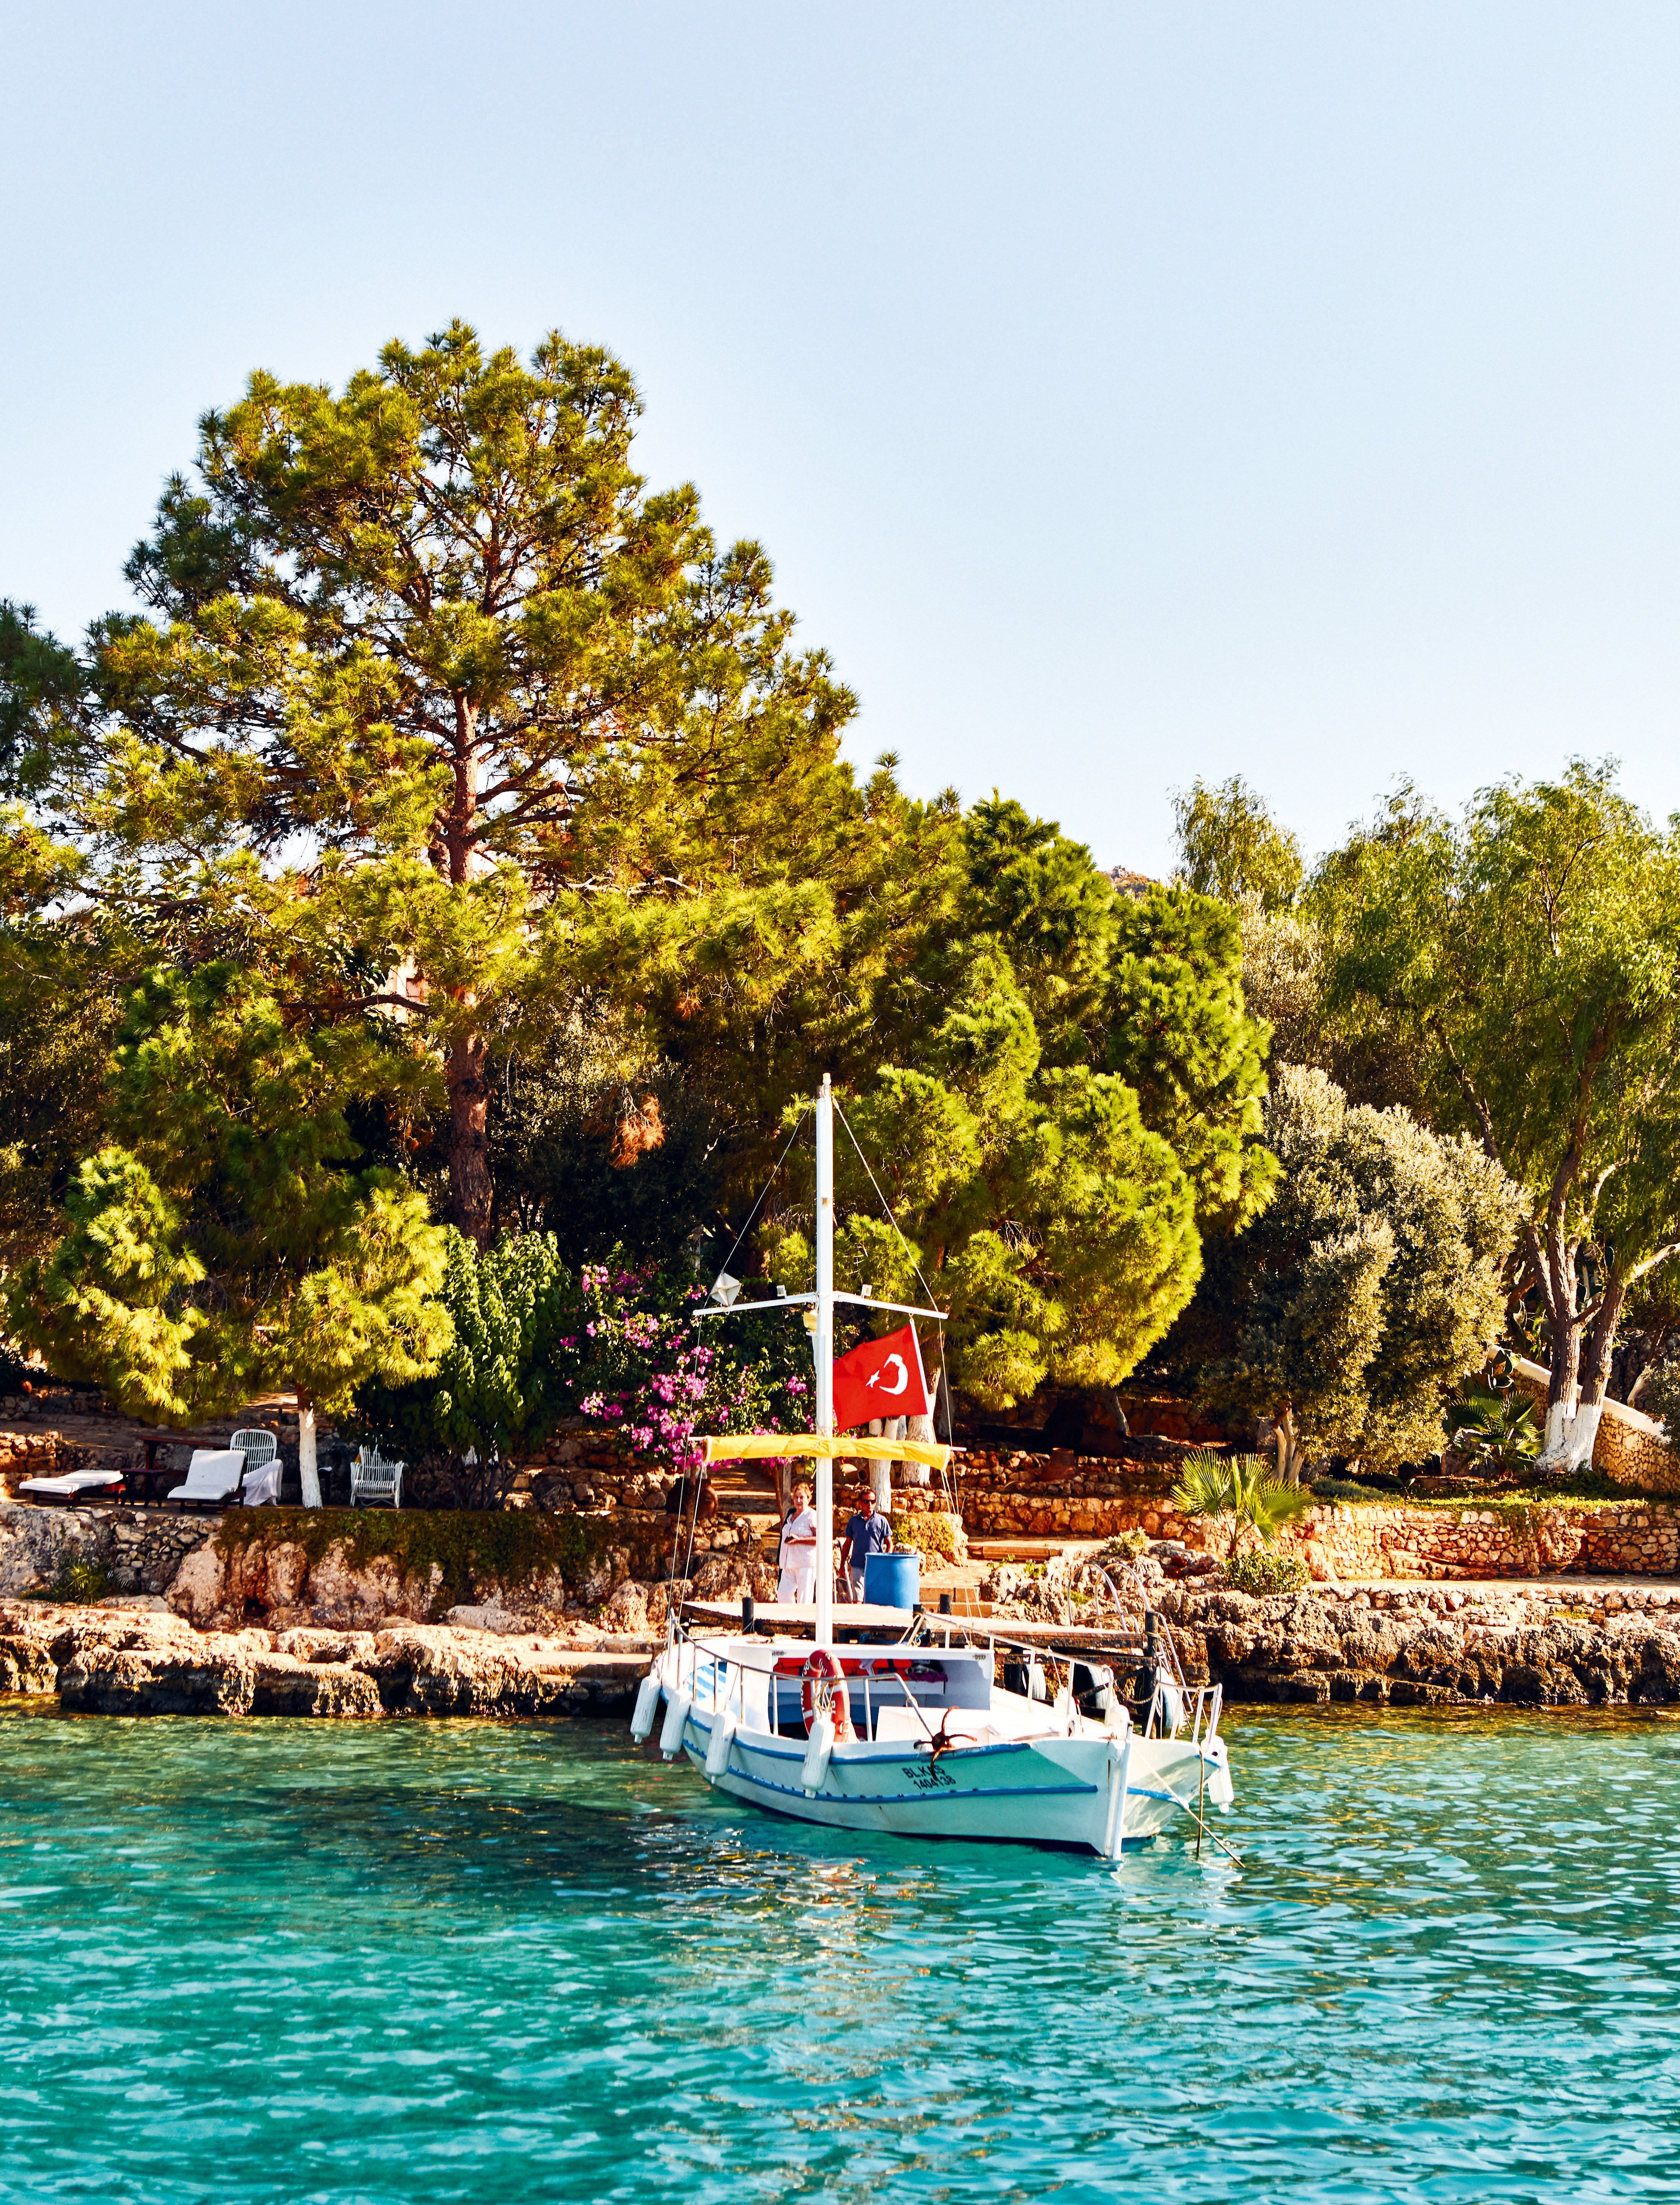 A blissful anchorage in the turquoise water of Kas. Photo by Olivier Pilcher.